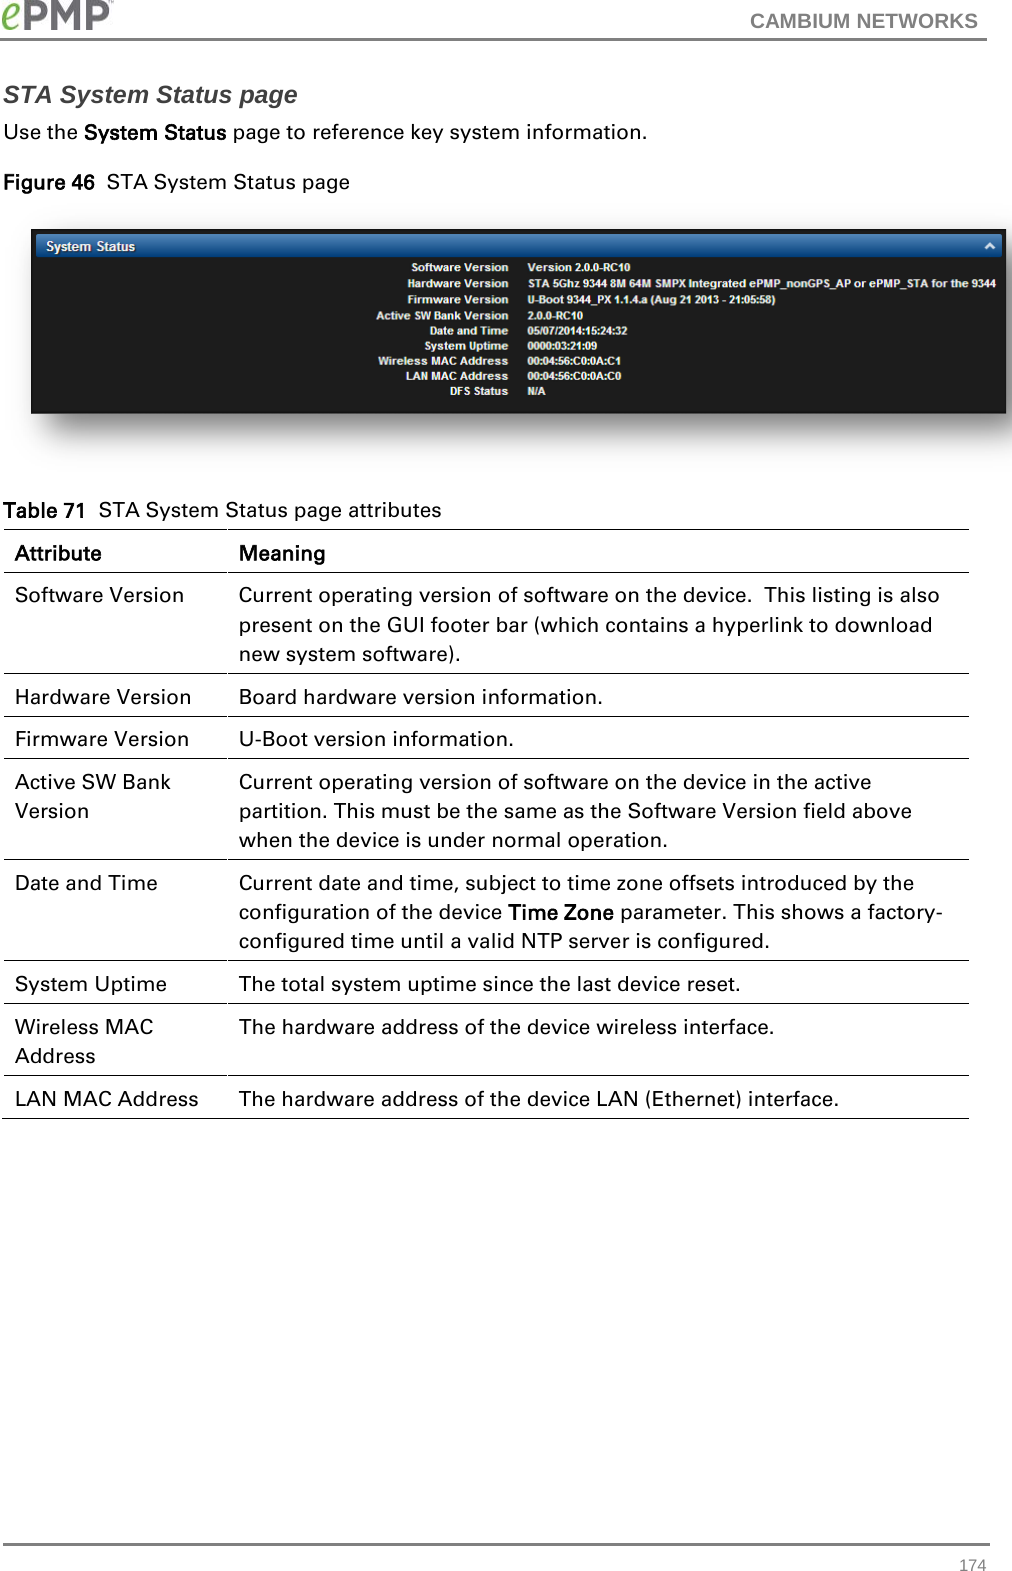 CAMBIUM NETWORKS  STA System Status page Use the System Status page to reference key system information. Figure 46  STA System Status page  Table 71  STA System Status page attributes Attribute Meaning Software Version Current operating version of software on the device.  This listing is also present on the GUI footer bar (which contains a hyperlink to download new system software). Hardware Version Board hardware version information. Firmware Version  U-Boot version information. Active SW Bank Version Current operating version of software on the device in the active partition. This must be the same as the Software Version field above when the device is under normal operation.  Date and Time Current date and time, subject to time zone offsets introduced by the configuration of the device Time Zone parameter. This shows a factory-configured time until a valid NTP server is configured. System Uptime The total system uptime since the last device reset. Wireless MAC Address The hardware address of the device wireless interface. LAN MAC Address The hardware address of the device LAN (Ethernet) interface.  174 